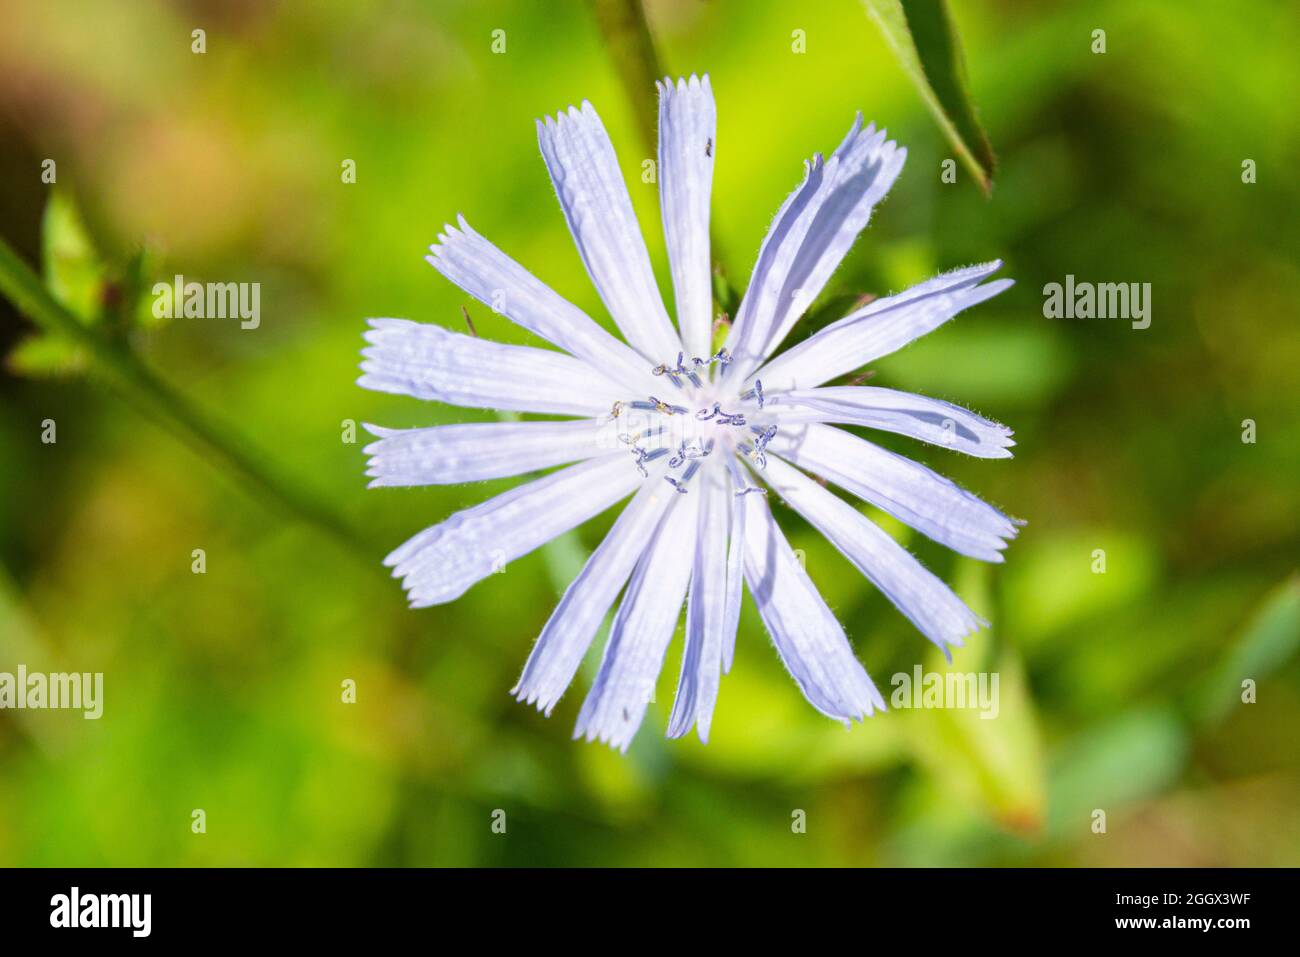 The flower of a chicory (Cichorium intybus) Stock Photo